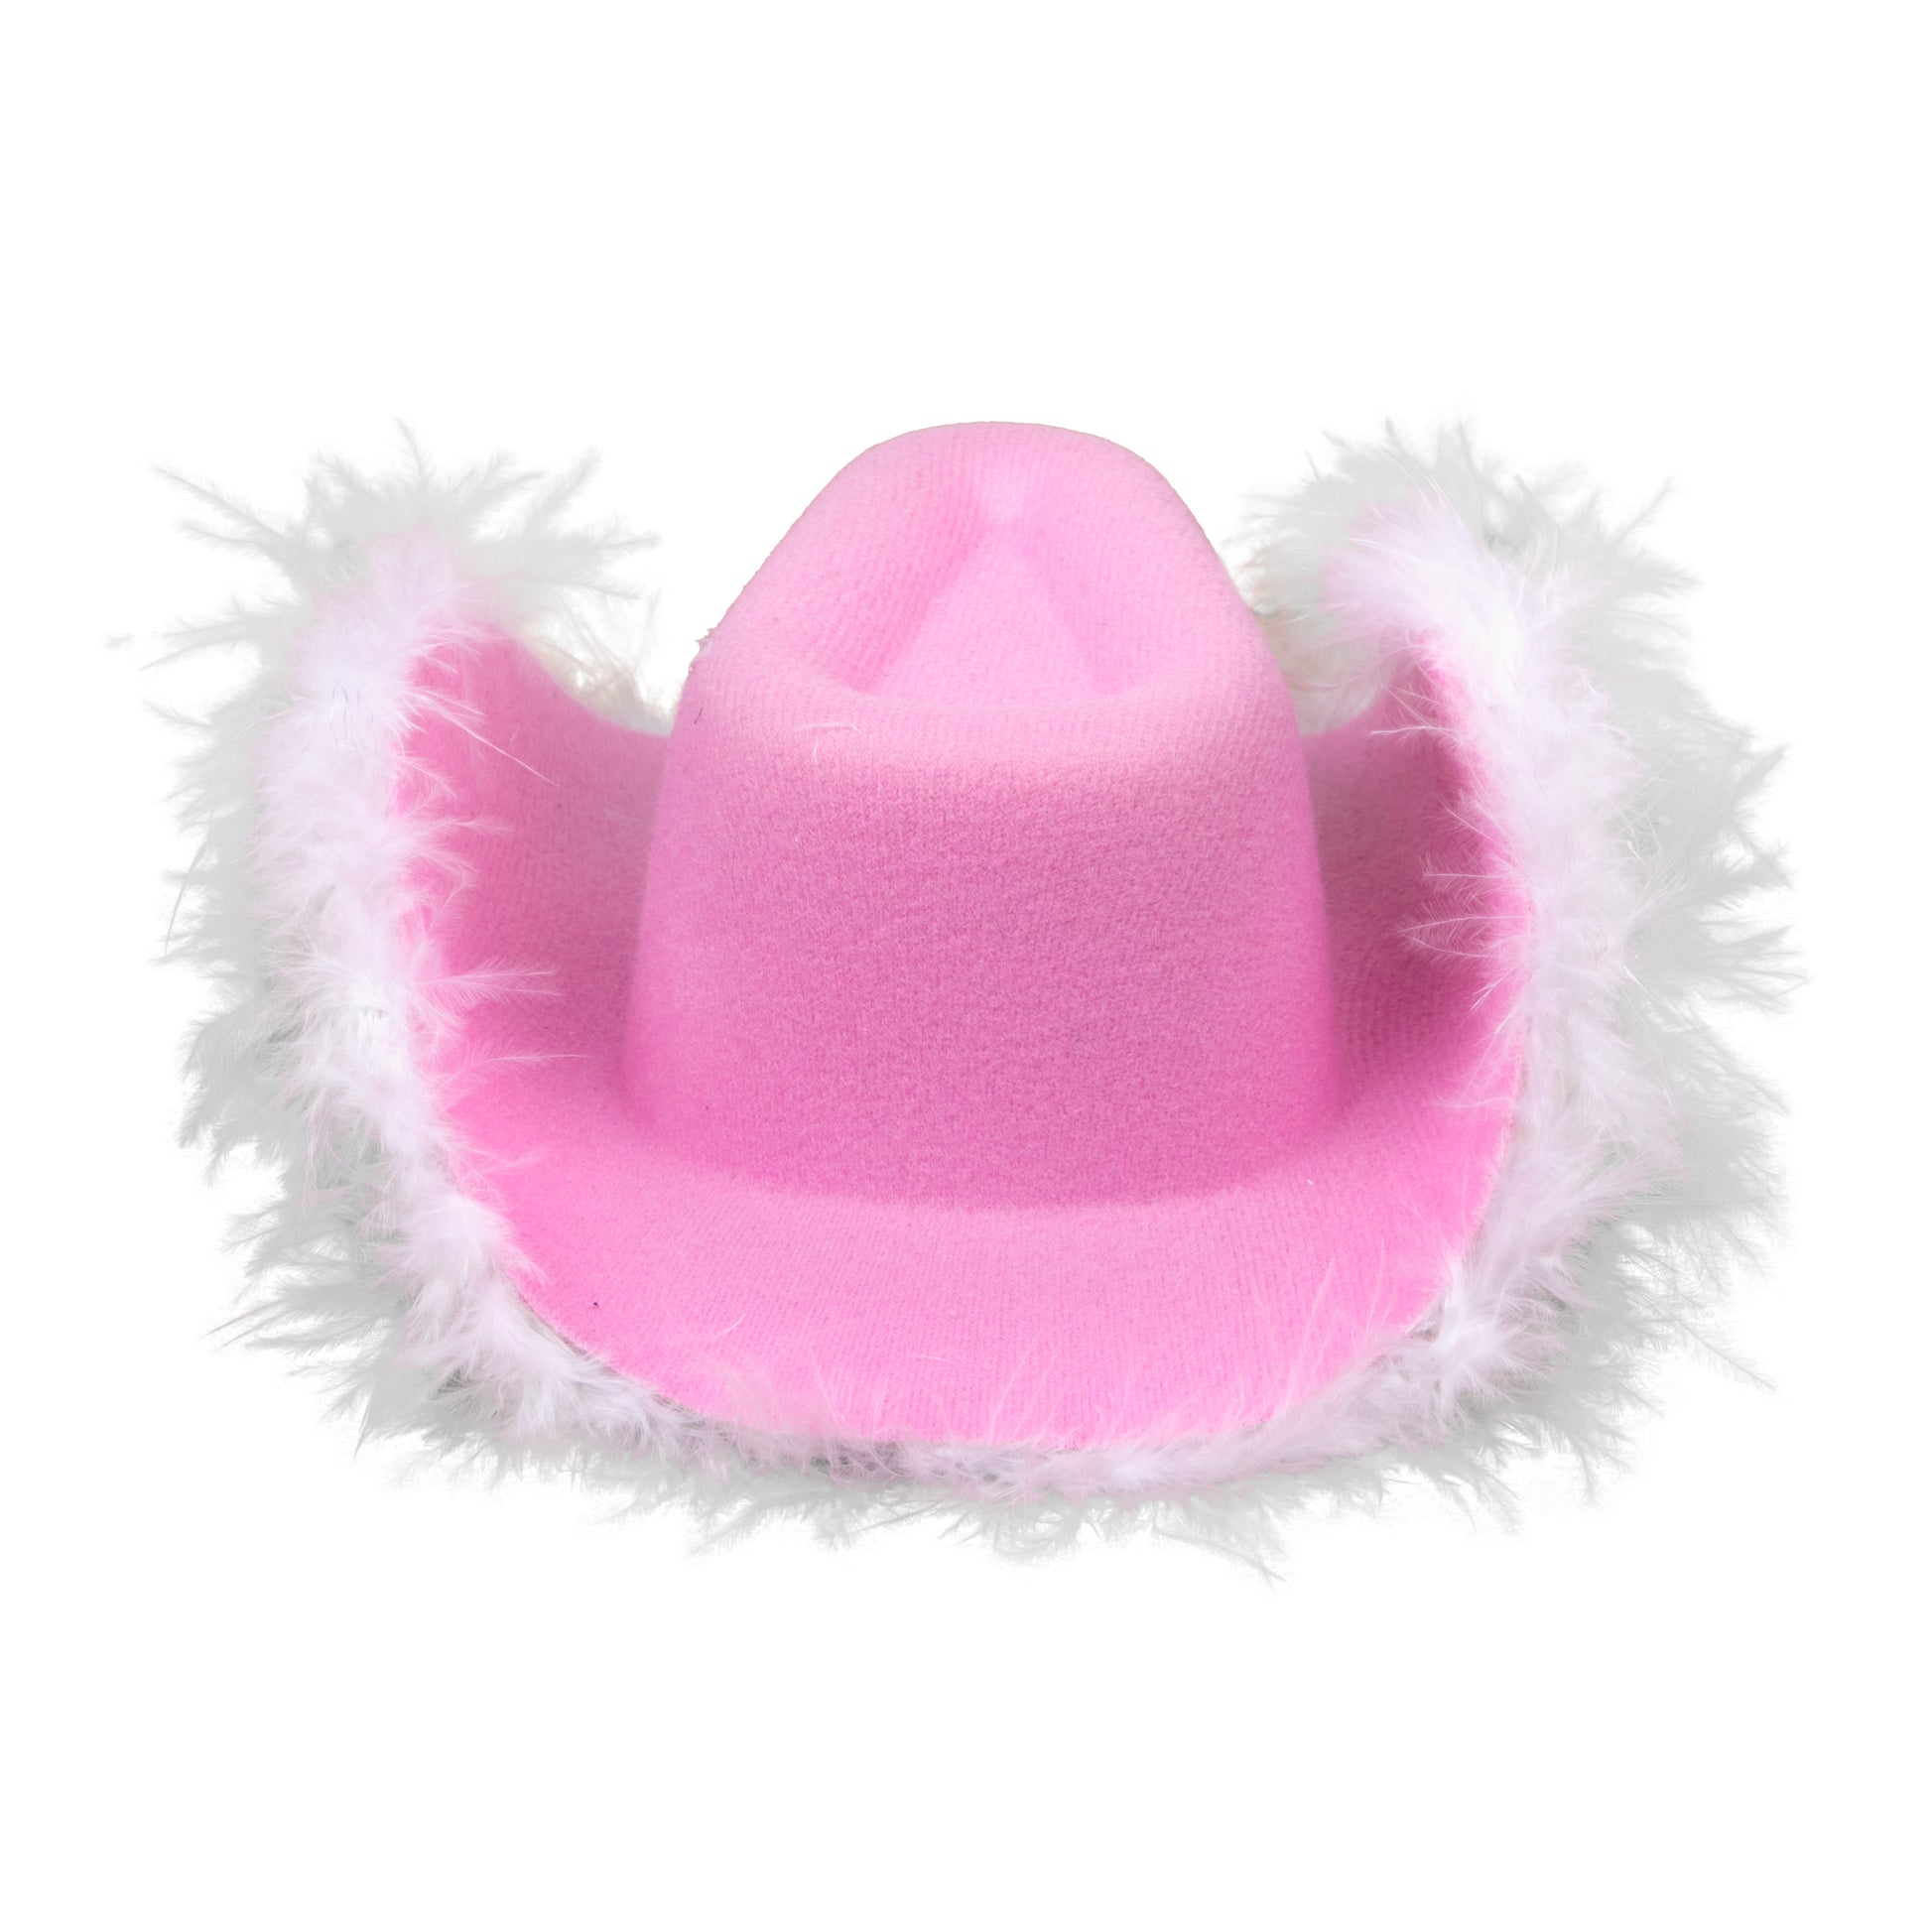 Pink Cowgirl Hat with Tiara